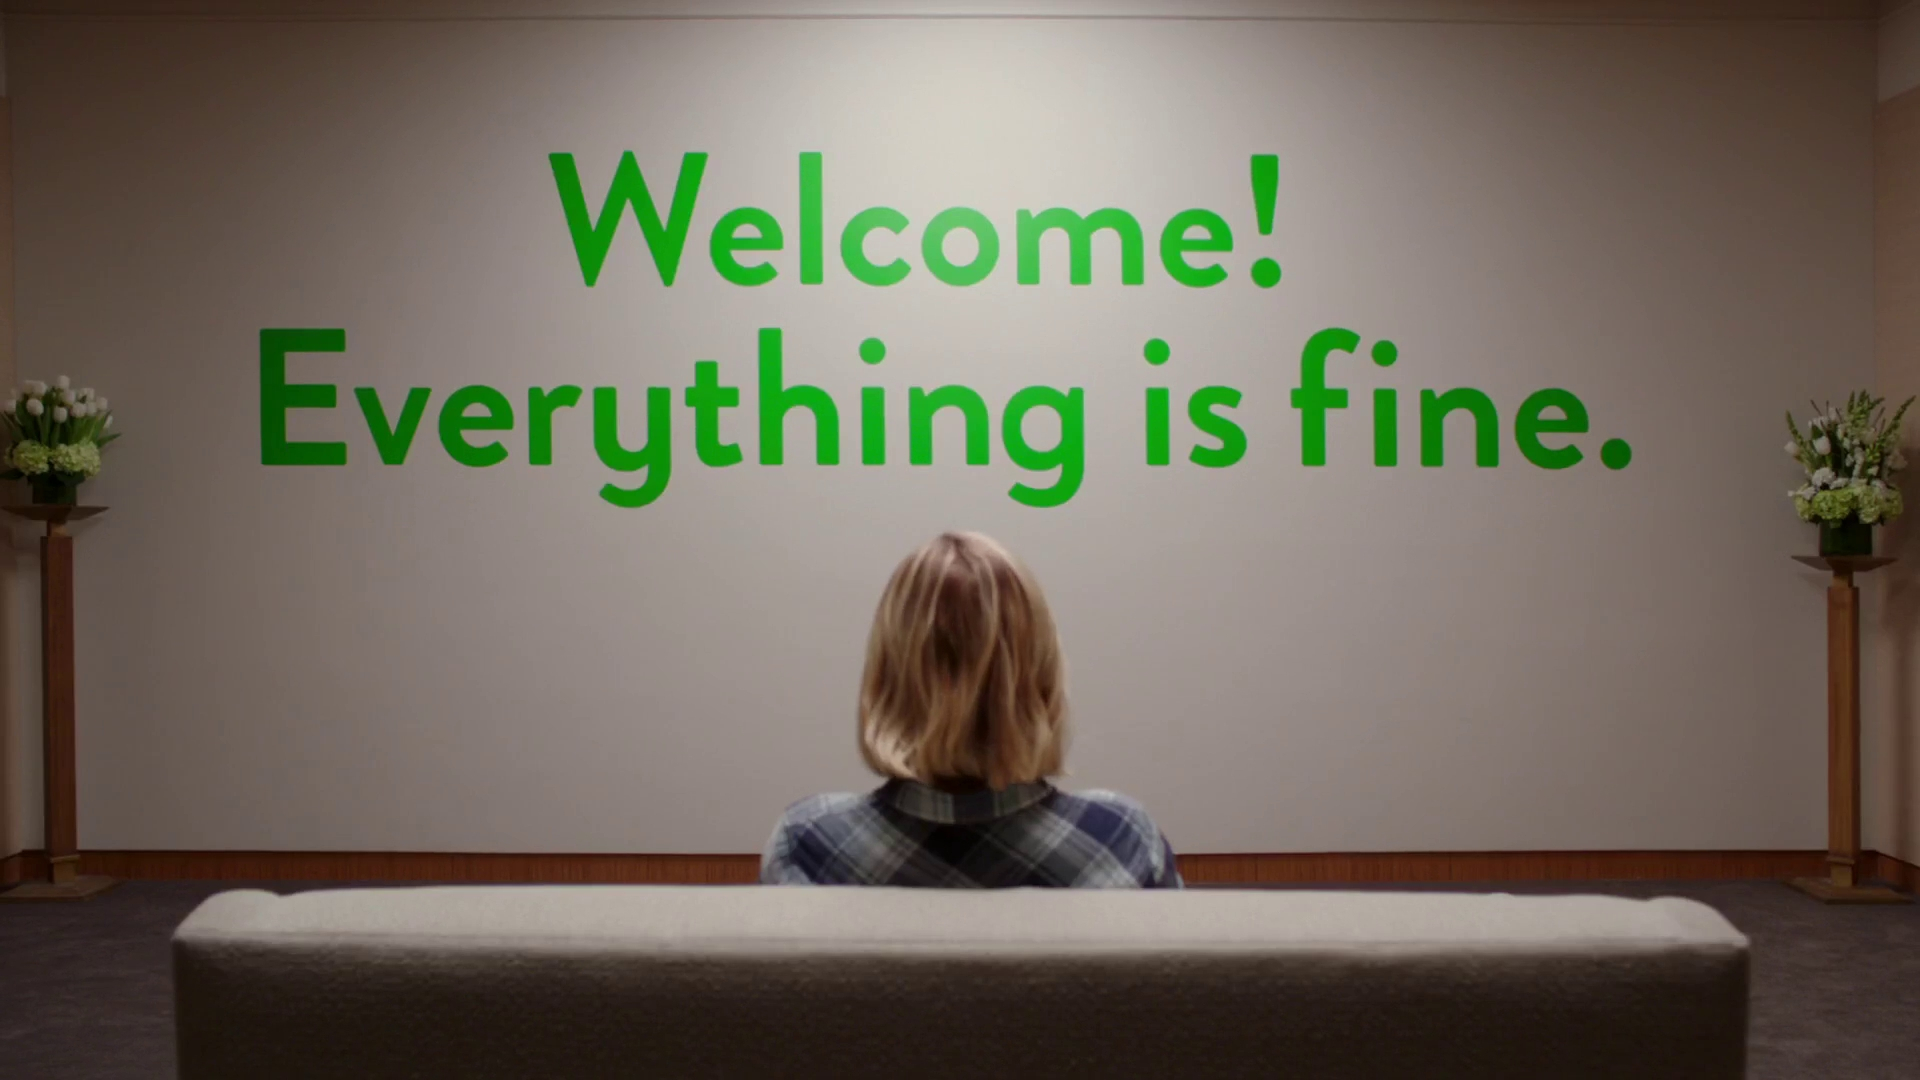 Eleanor looks at a sign that says "Welcome! Everything is fine." in The Good Place.